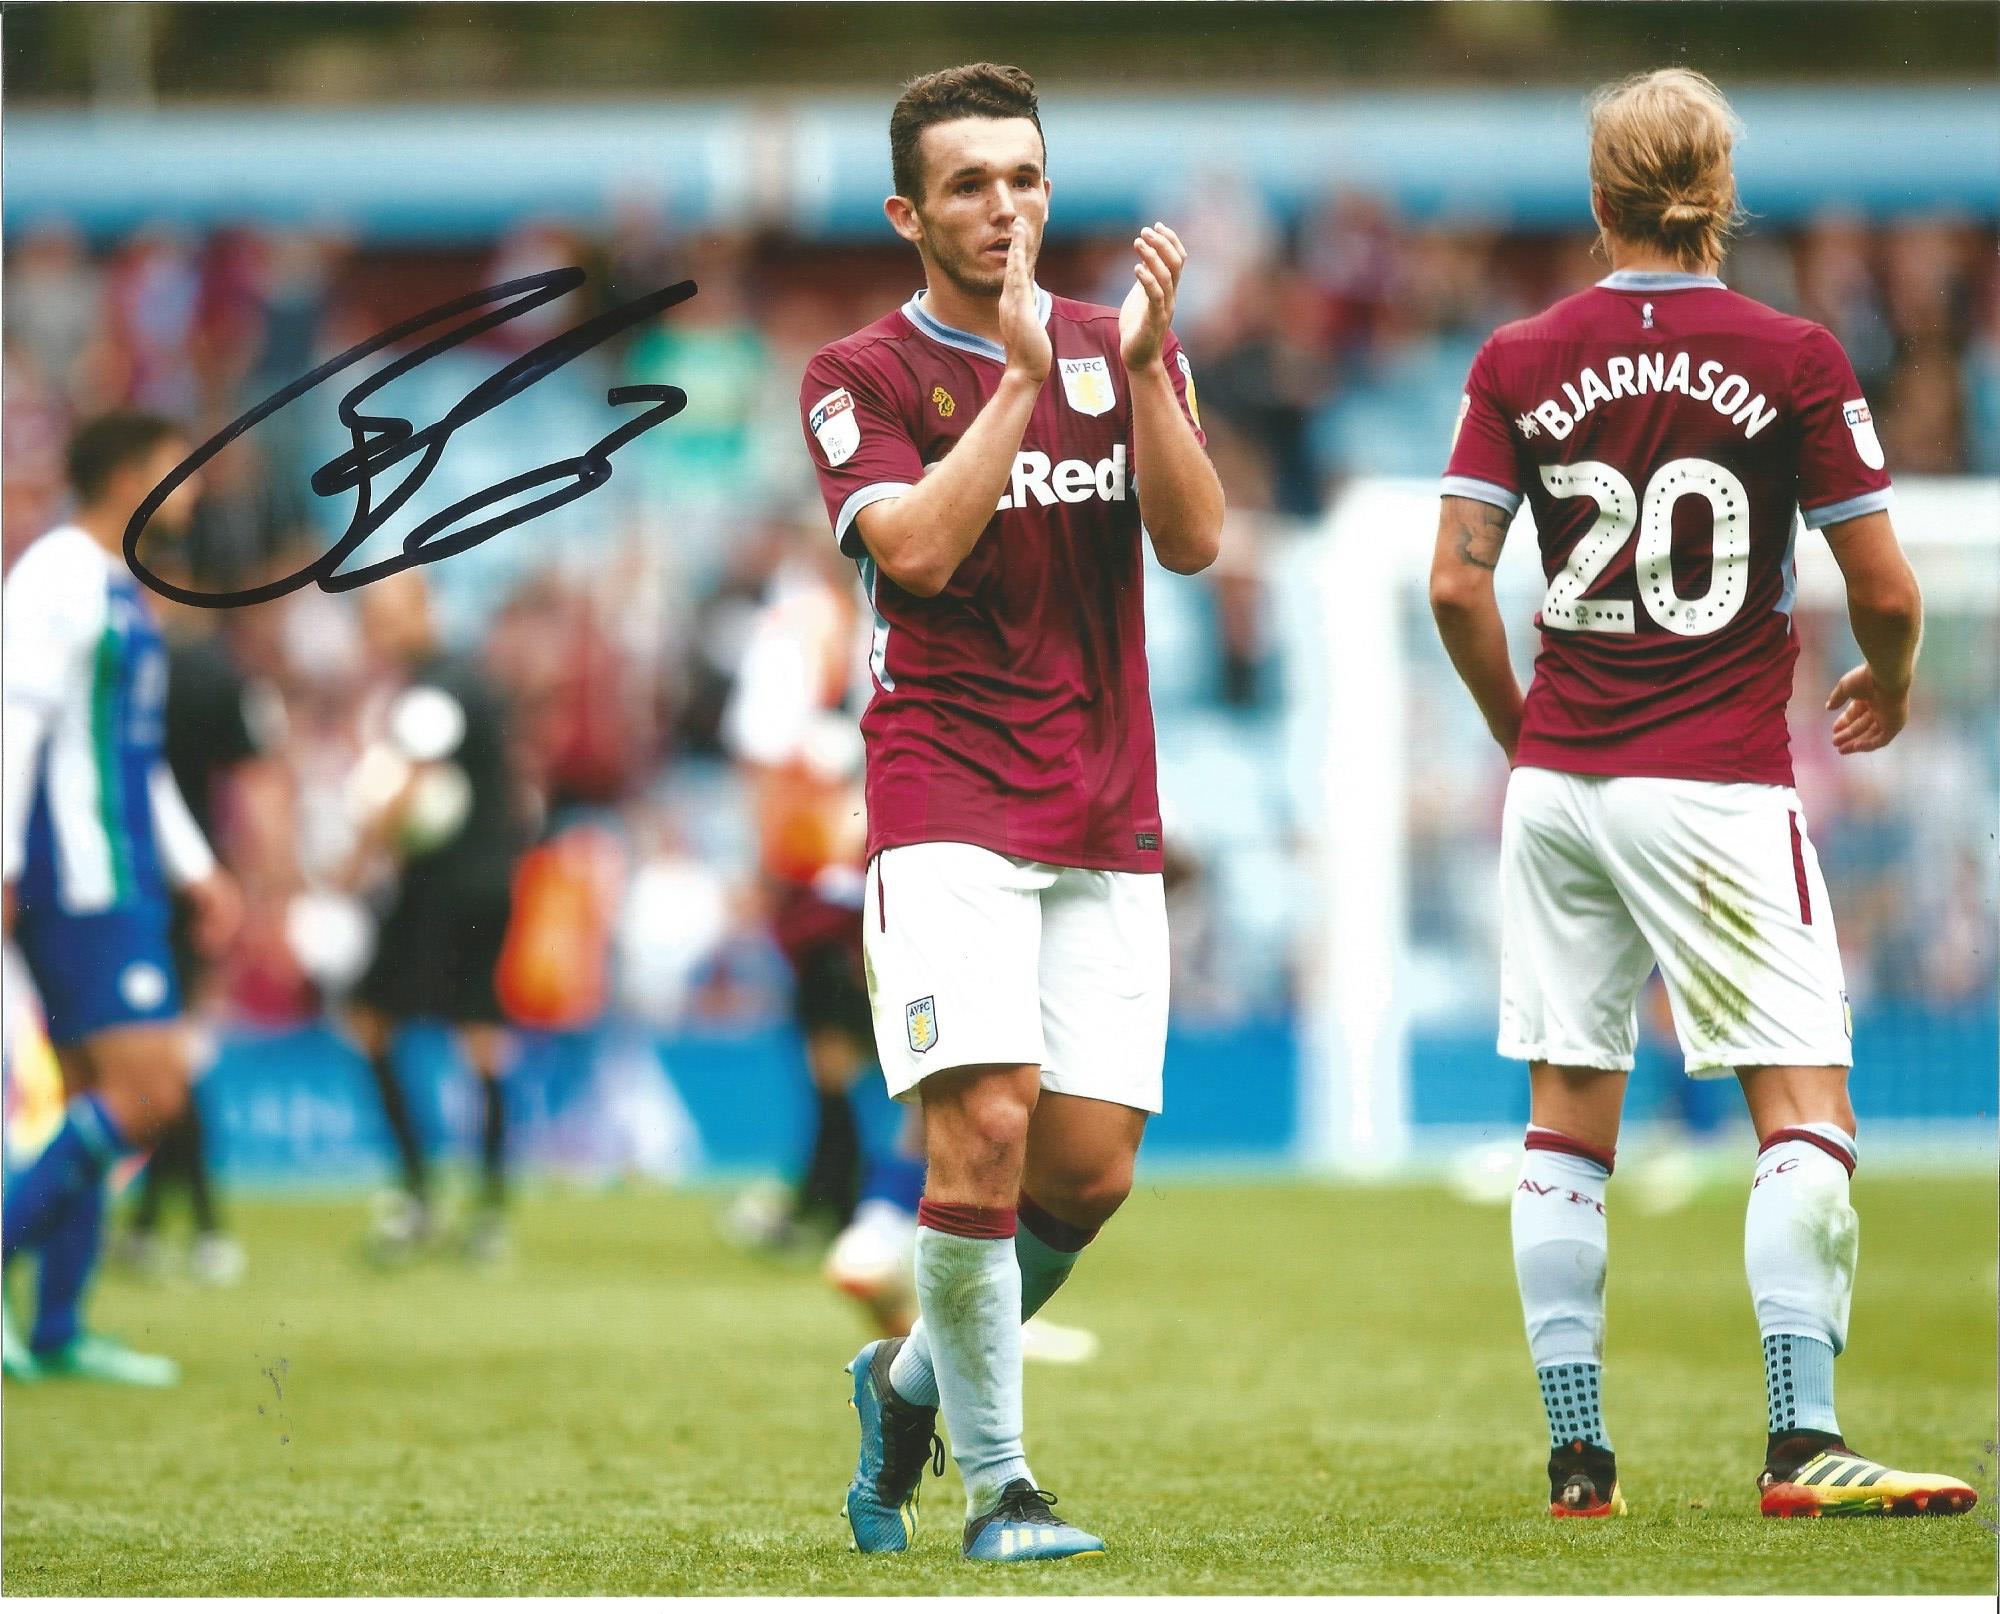 John Mcginn Signed Aston Villa 8x10 Photo. Good Condition. All signed pieces come with a Certificate